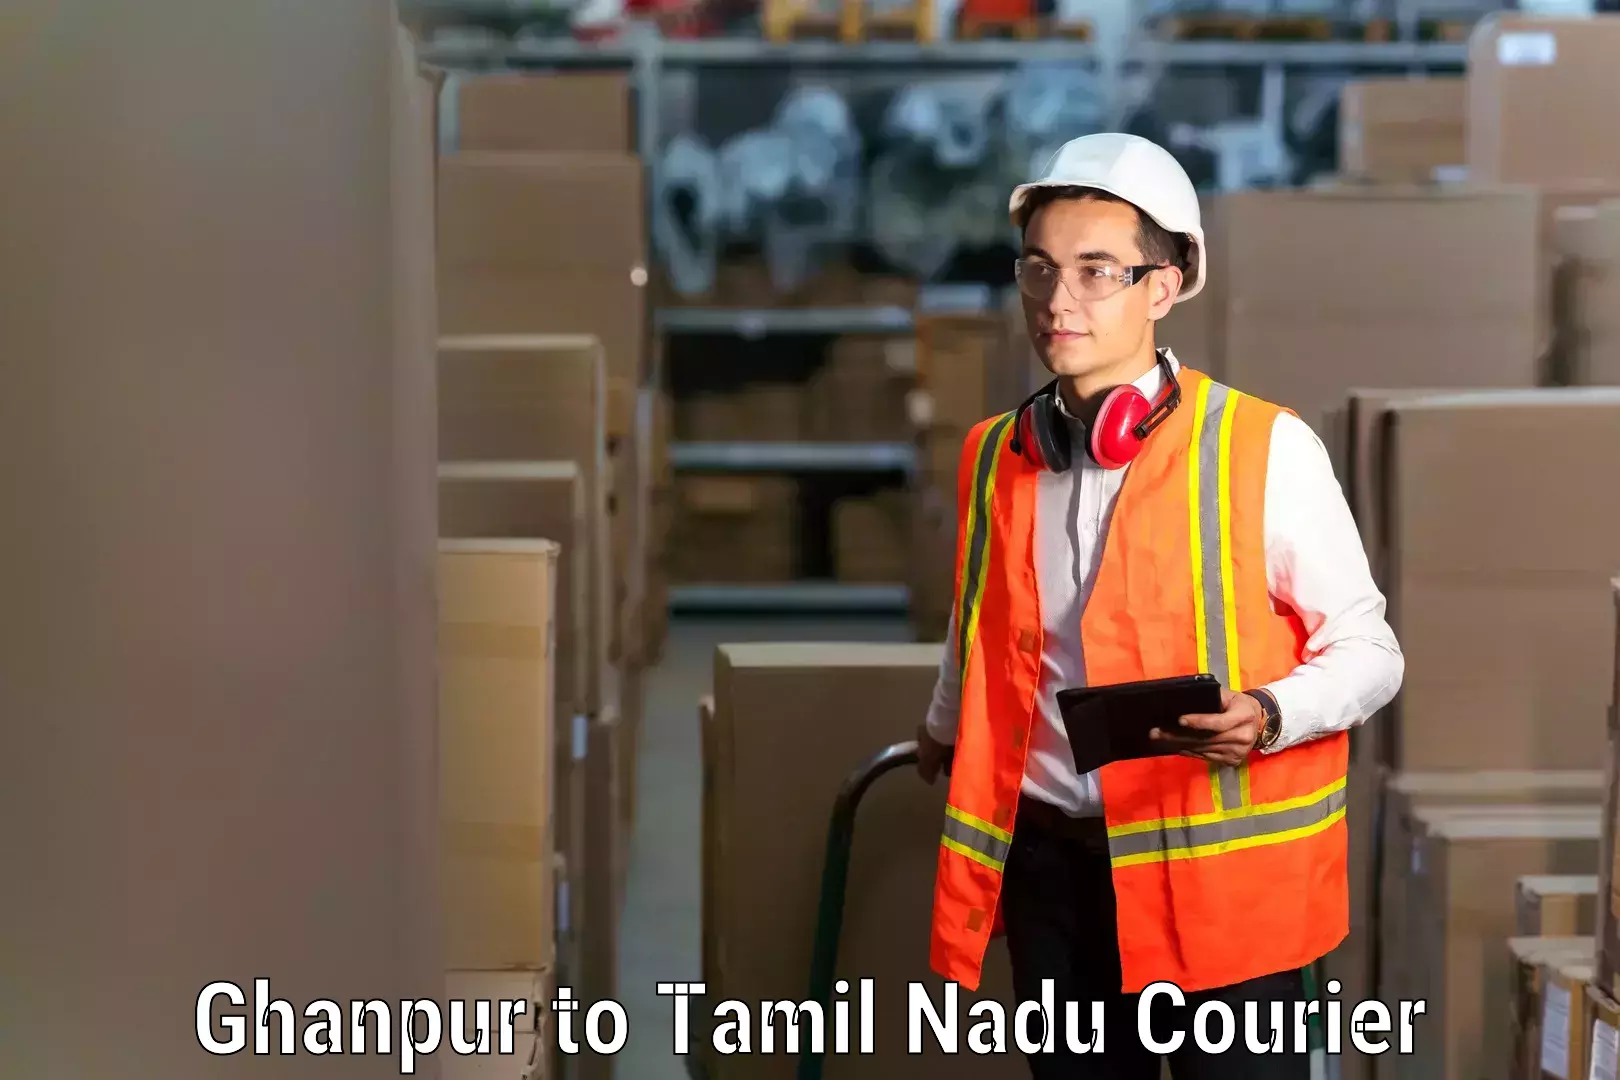 Quality relocation services Ghanpur to Tiruchi